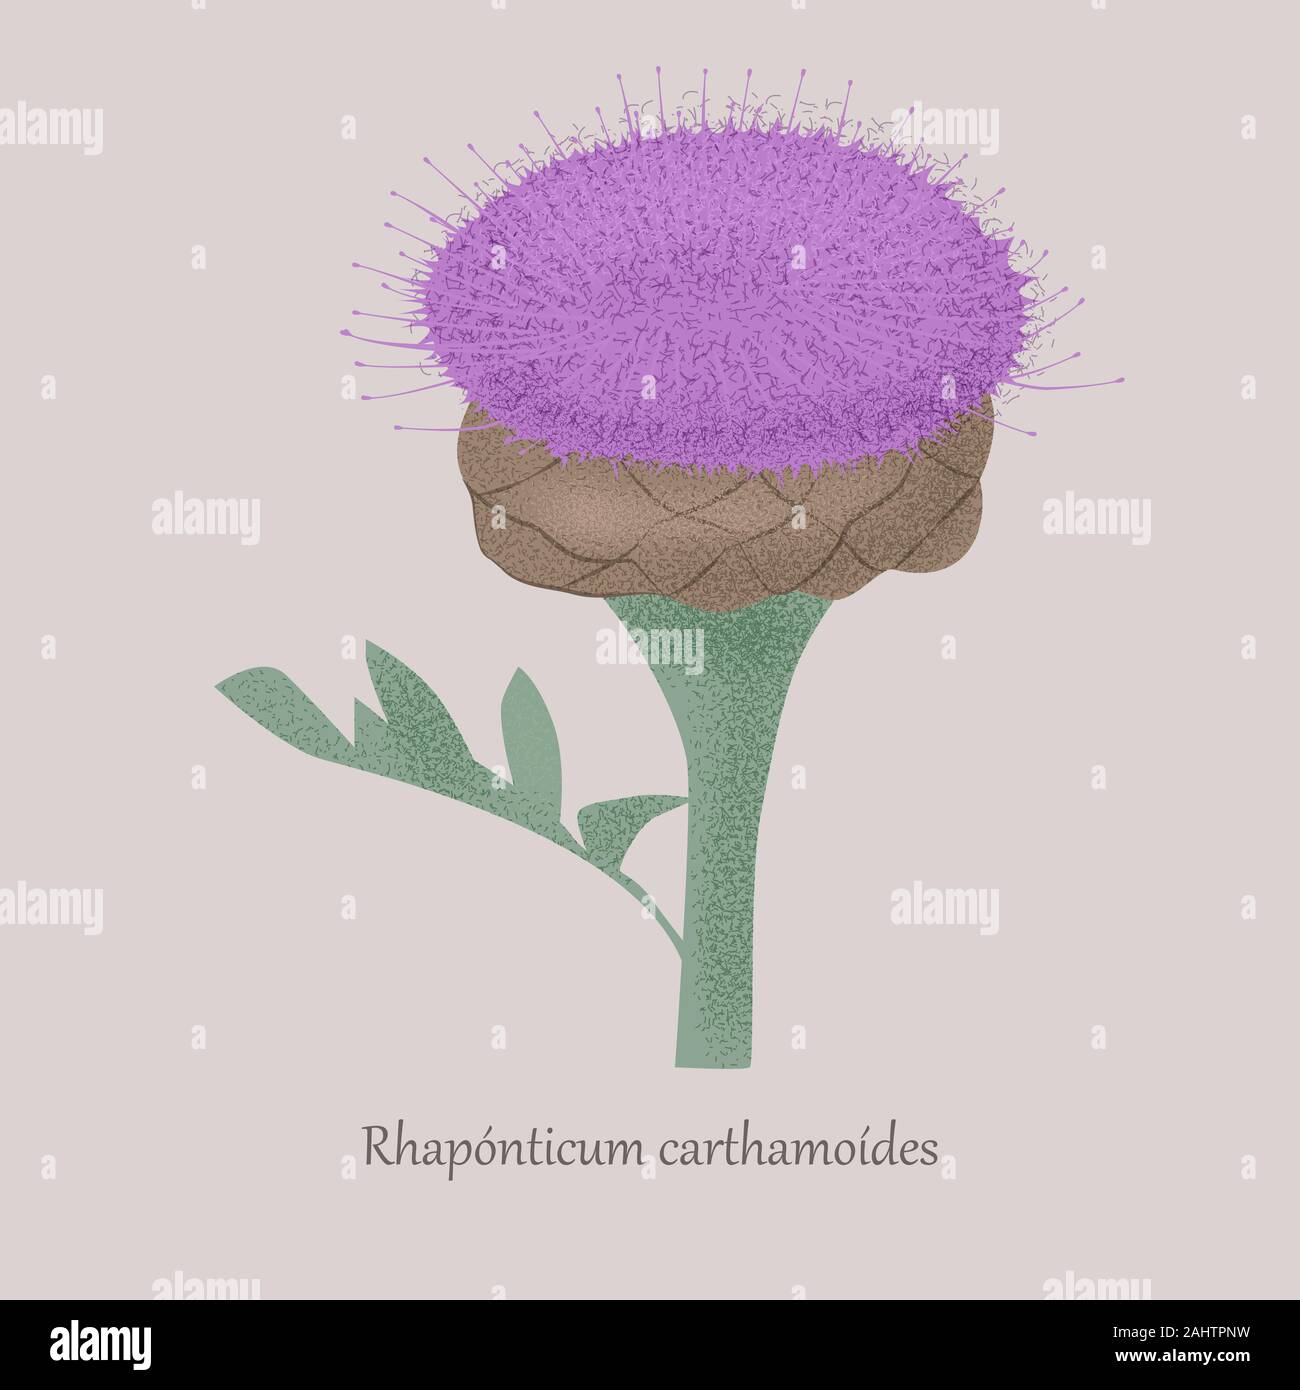 Maral root, rhaponticum carthamoides medicinal plant on a gray background. Stock Vector